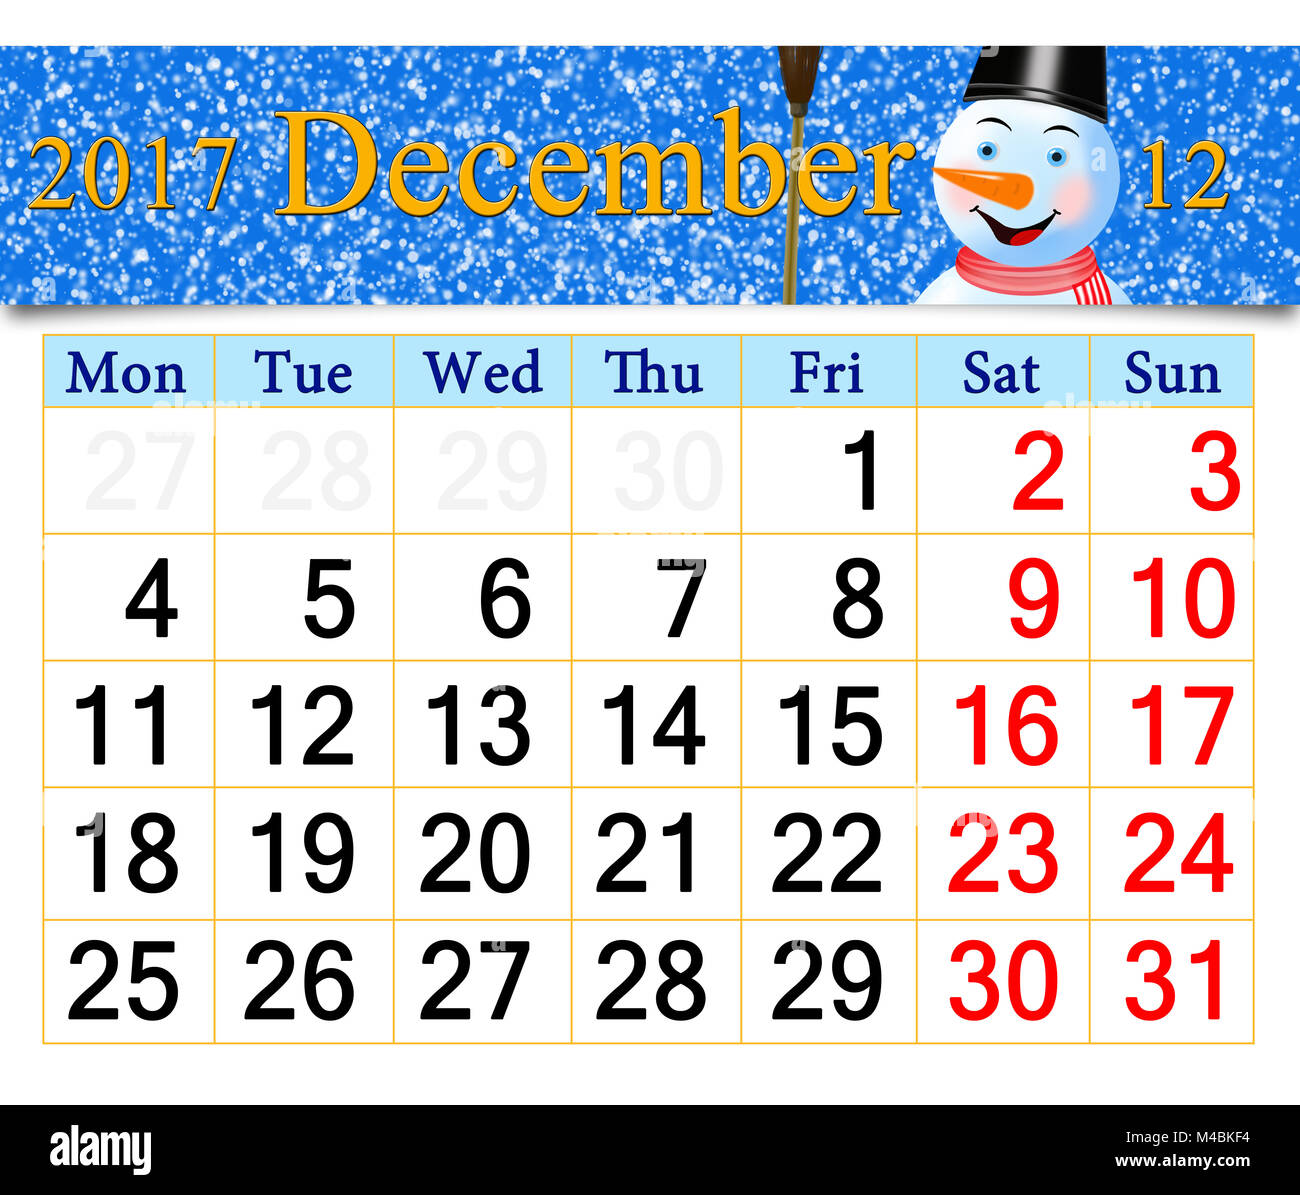 calendar for December 2017 with picture of fabulous snowman Stock Photo